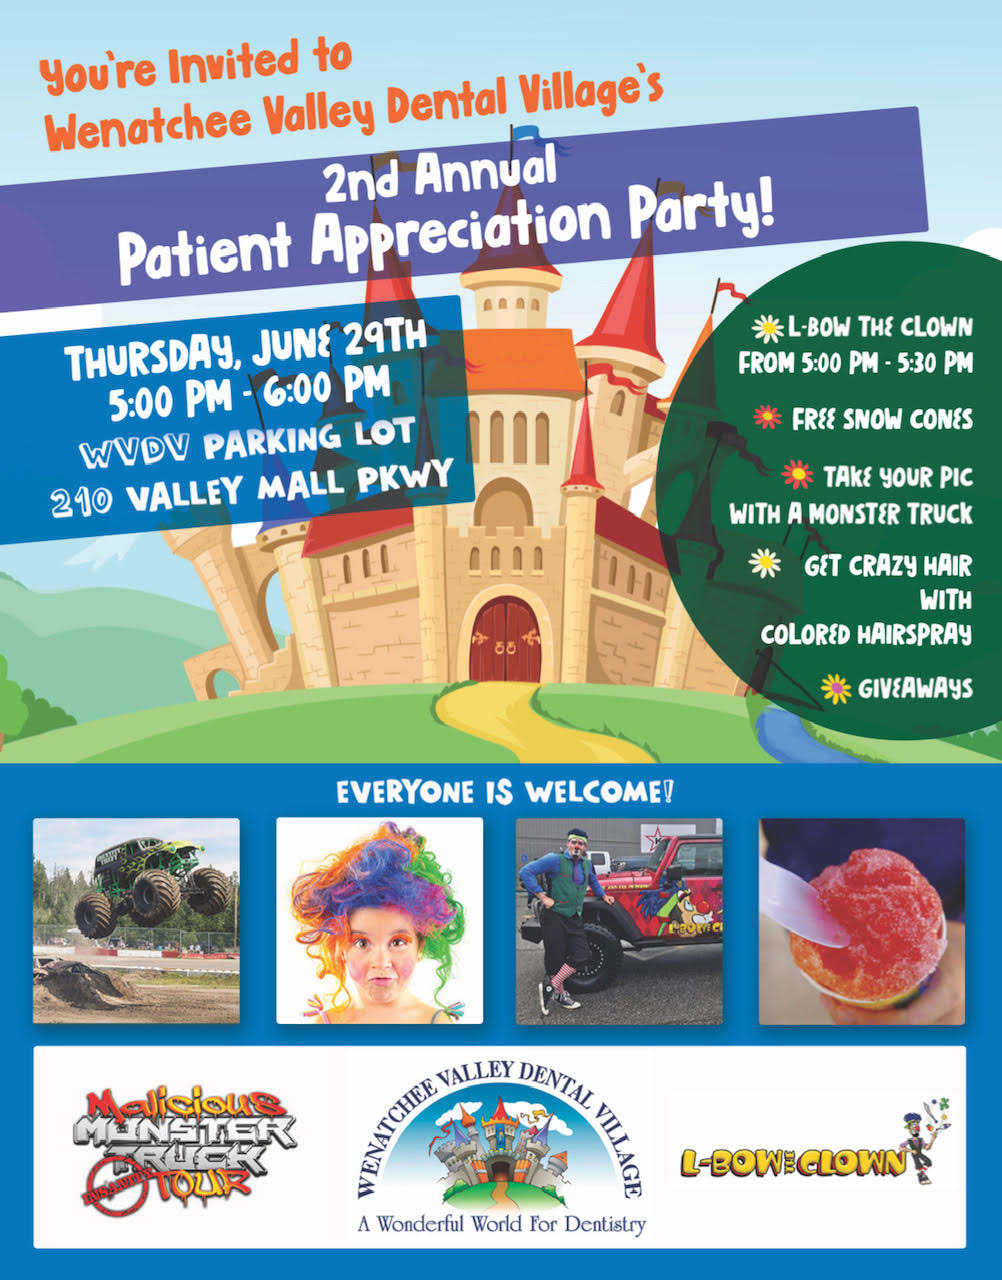 <h1 class="tribe-events-single-event-title">2nd Annual Patient Appreciation Party</h1>